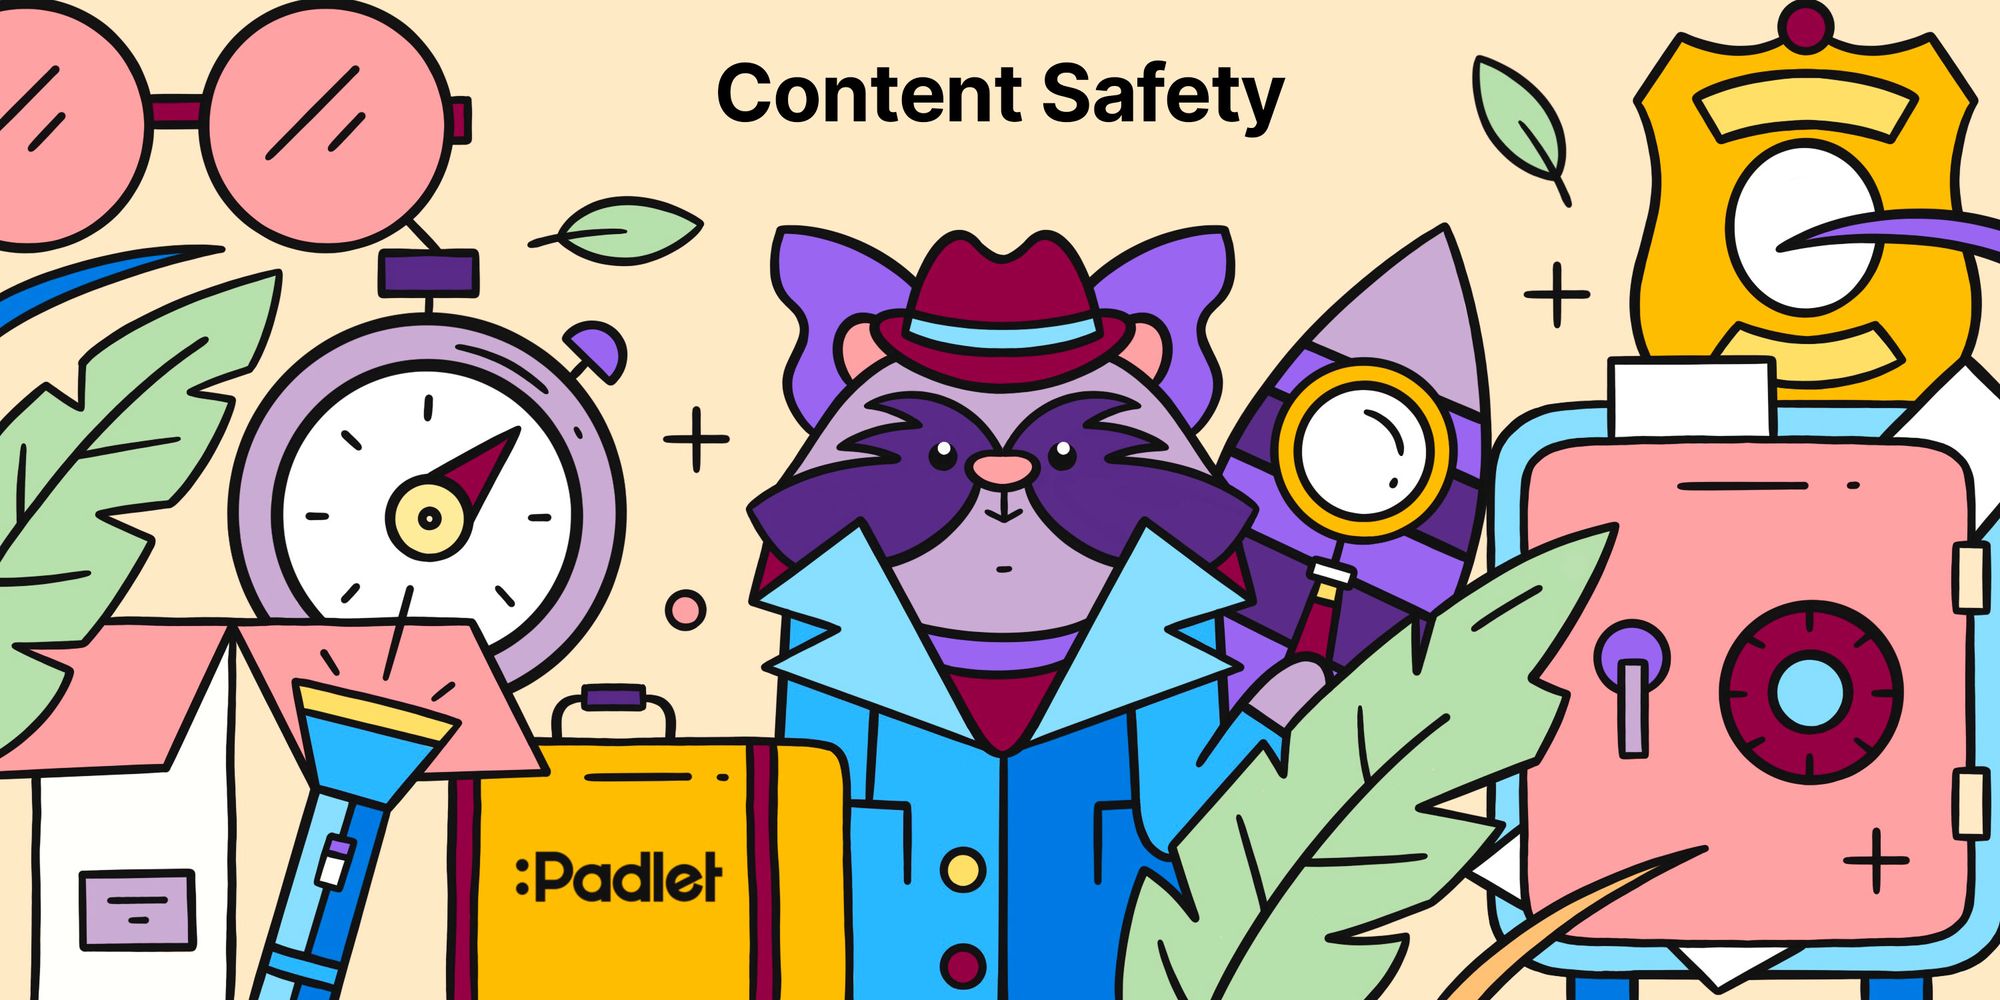 Content safety